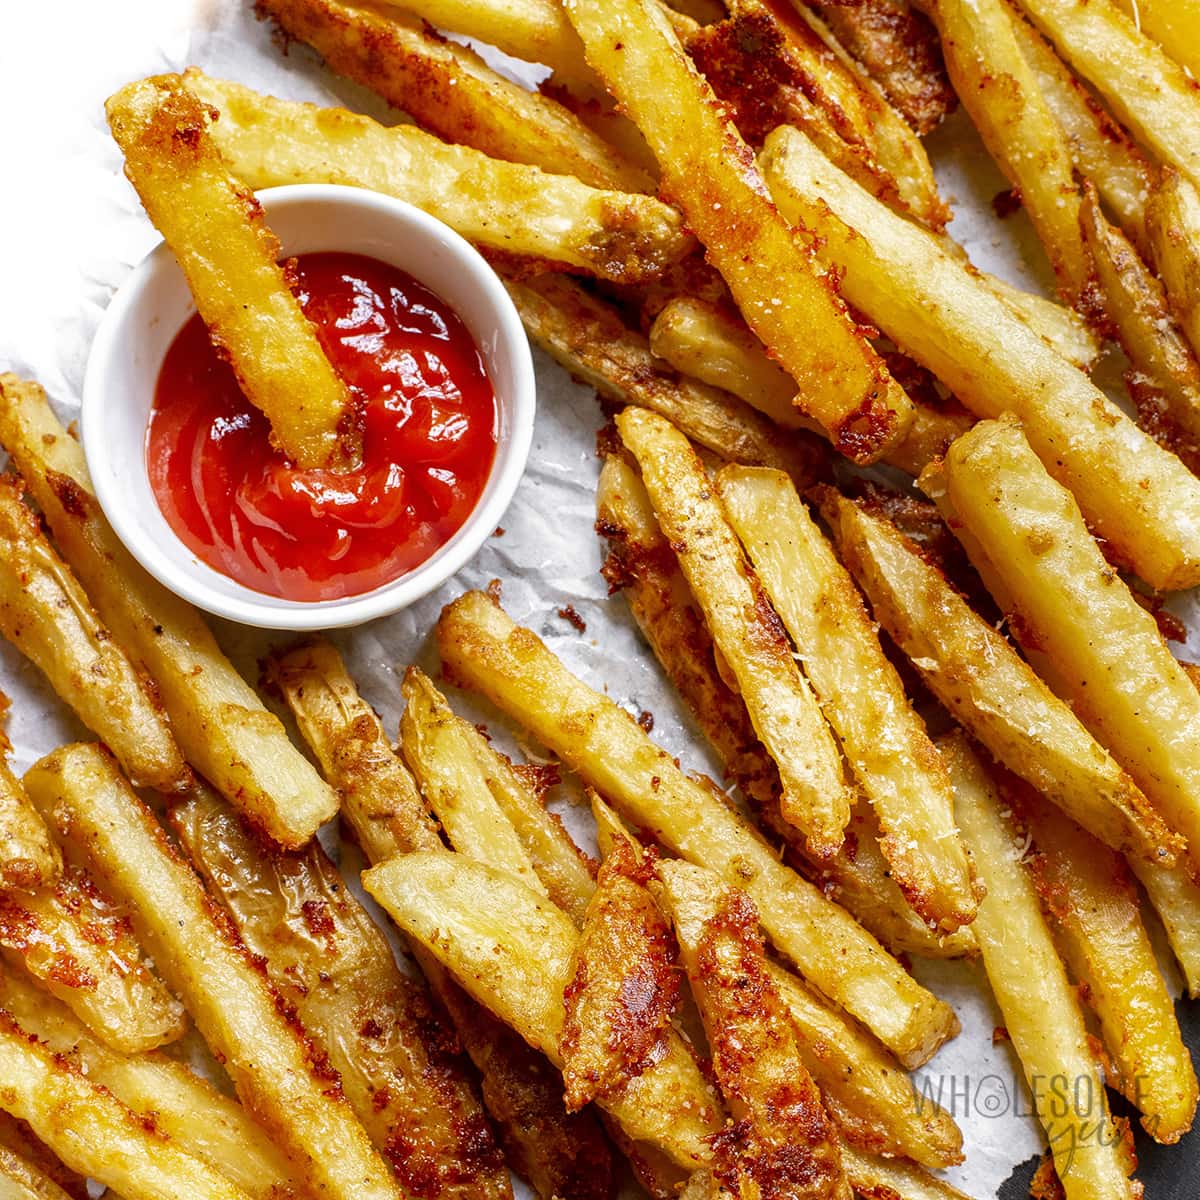 Garlic Parmesan Fries | Wholesome Yum | Easy healthy recipes. 10 ingredients or less.